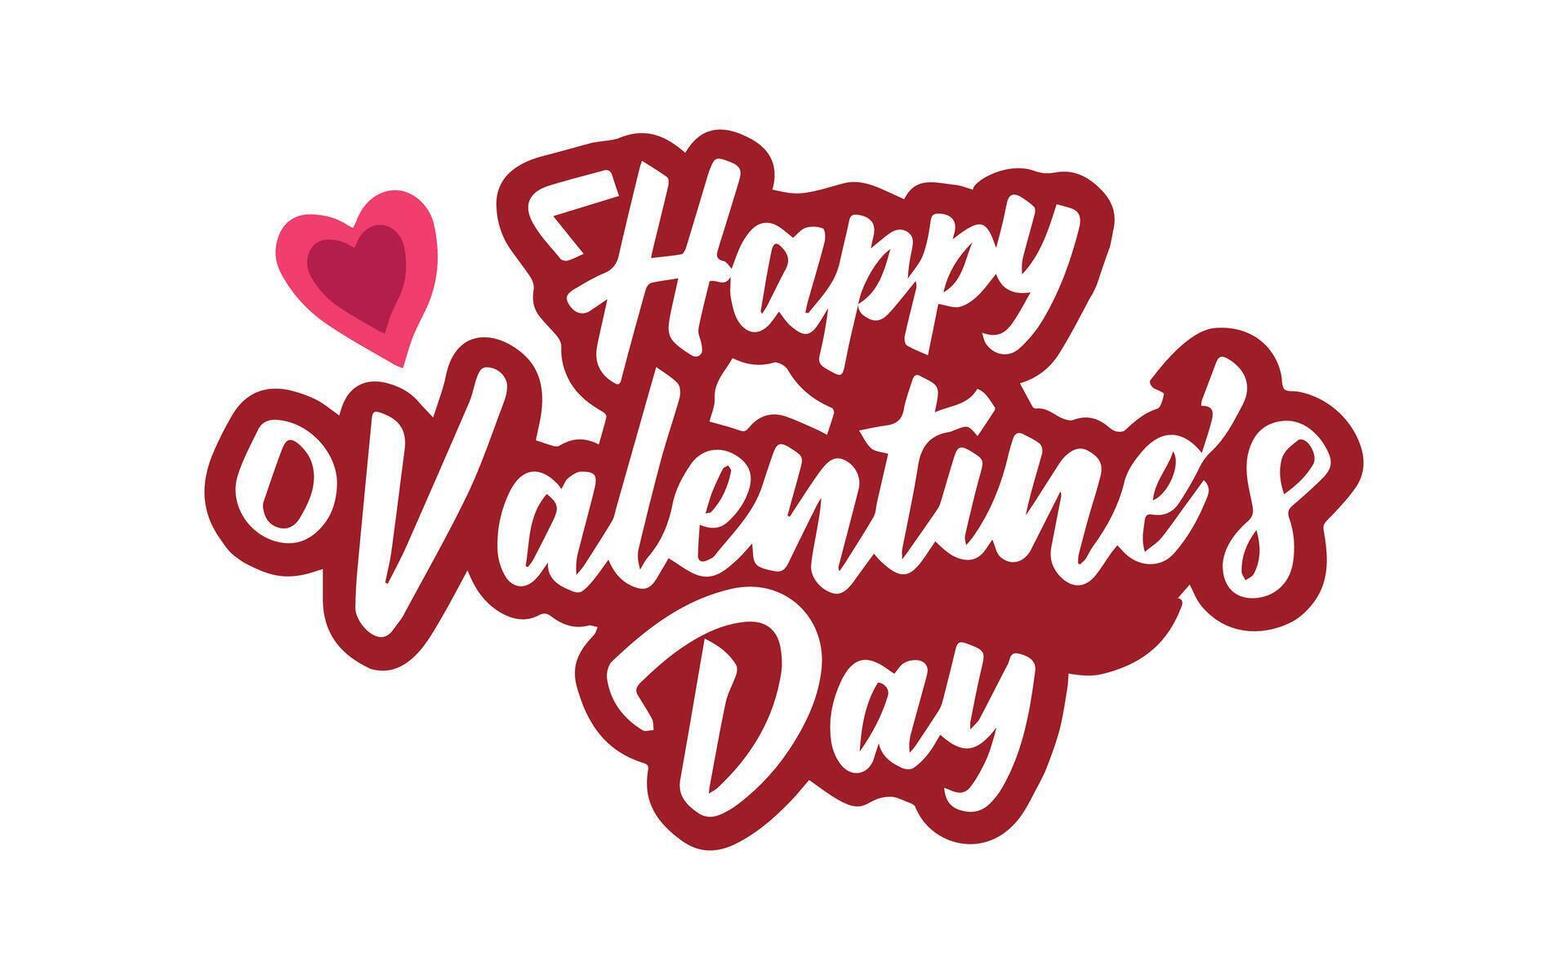 Happy Valentines Day lettering calligraphy text with Love shape vector